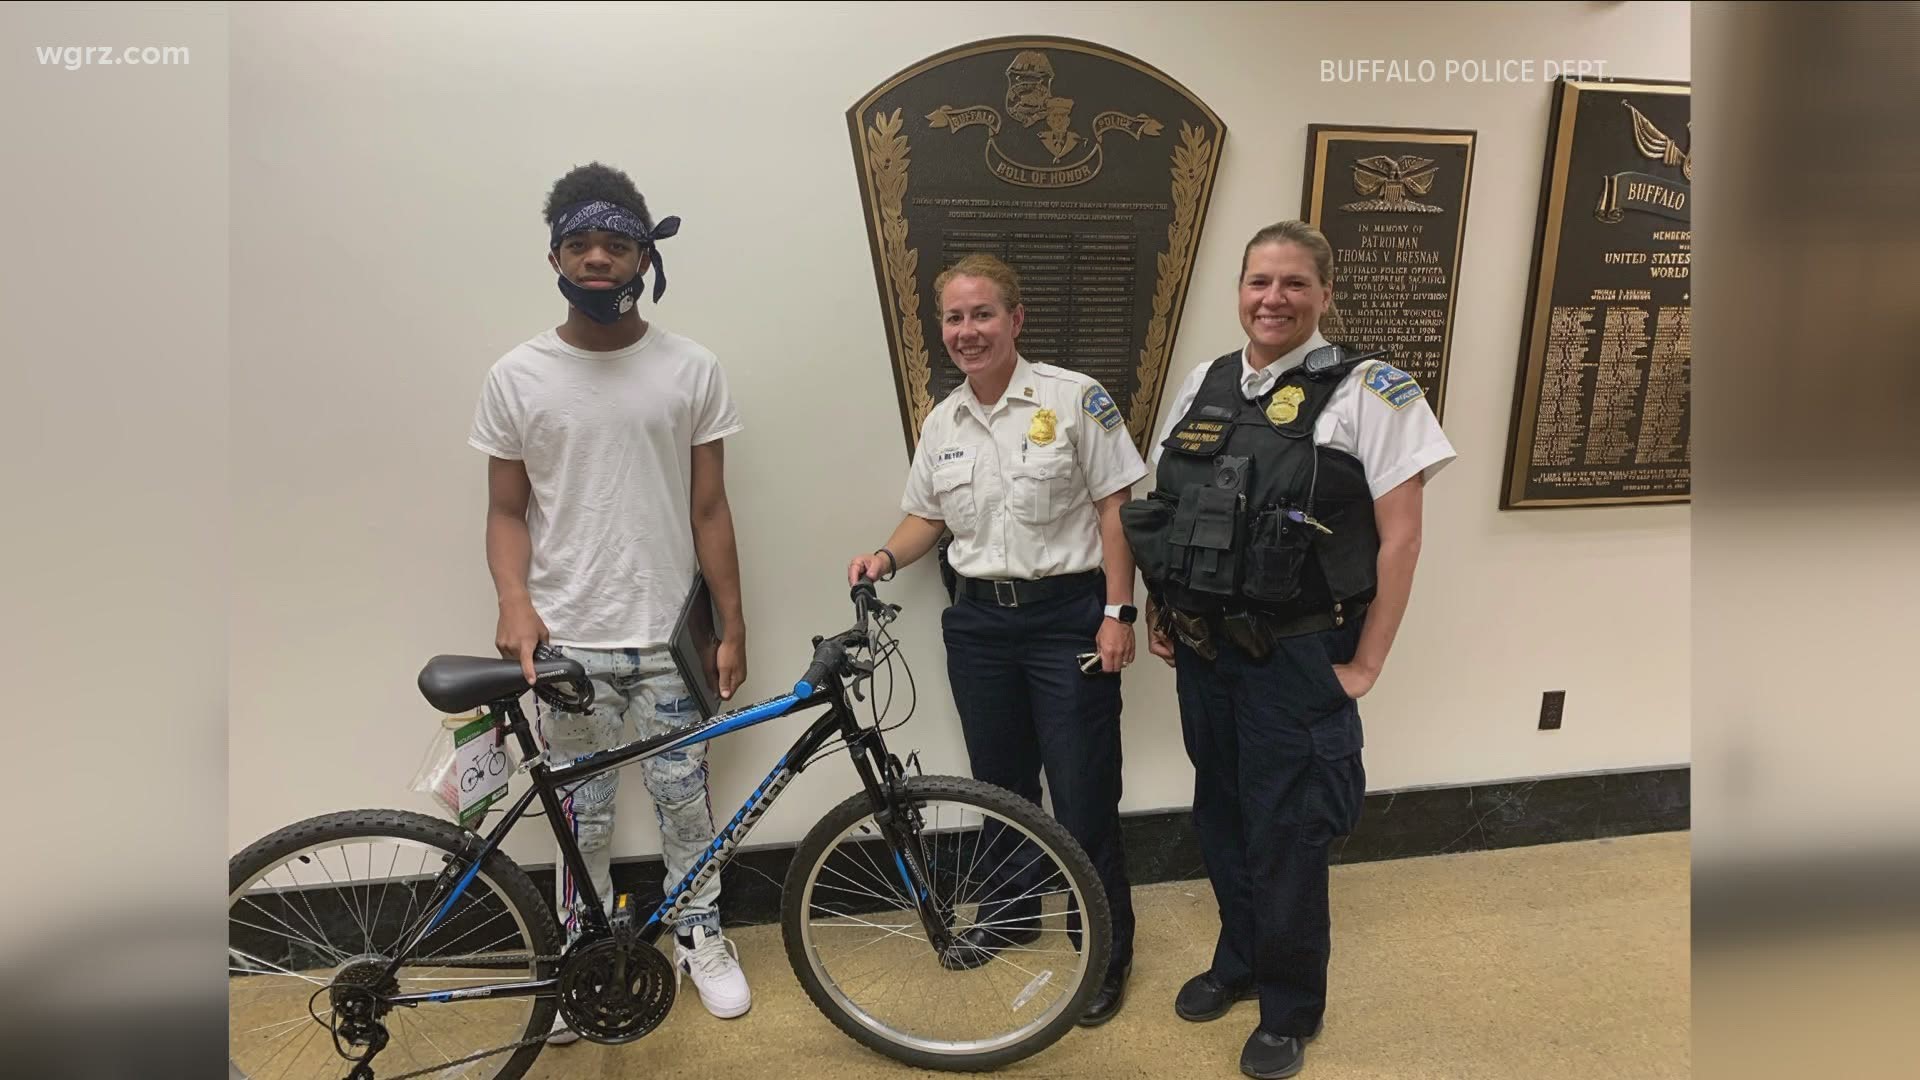 BPD helps boy out, buys him new bike